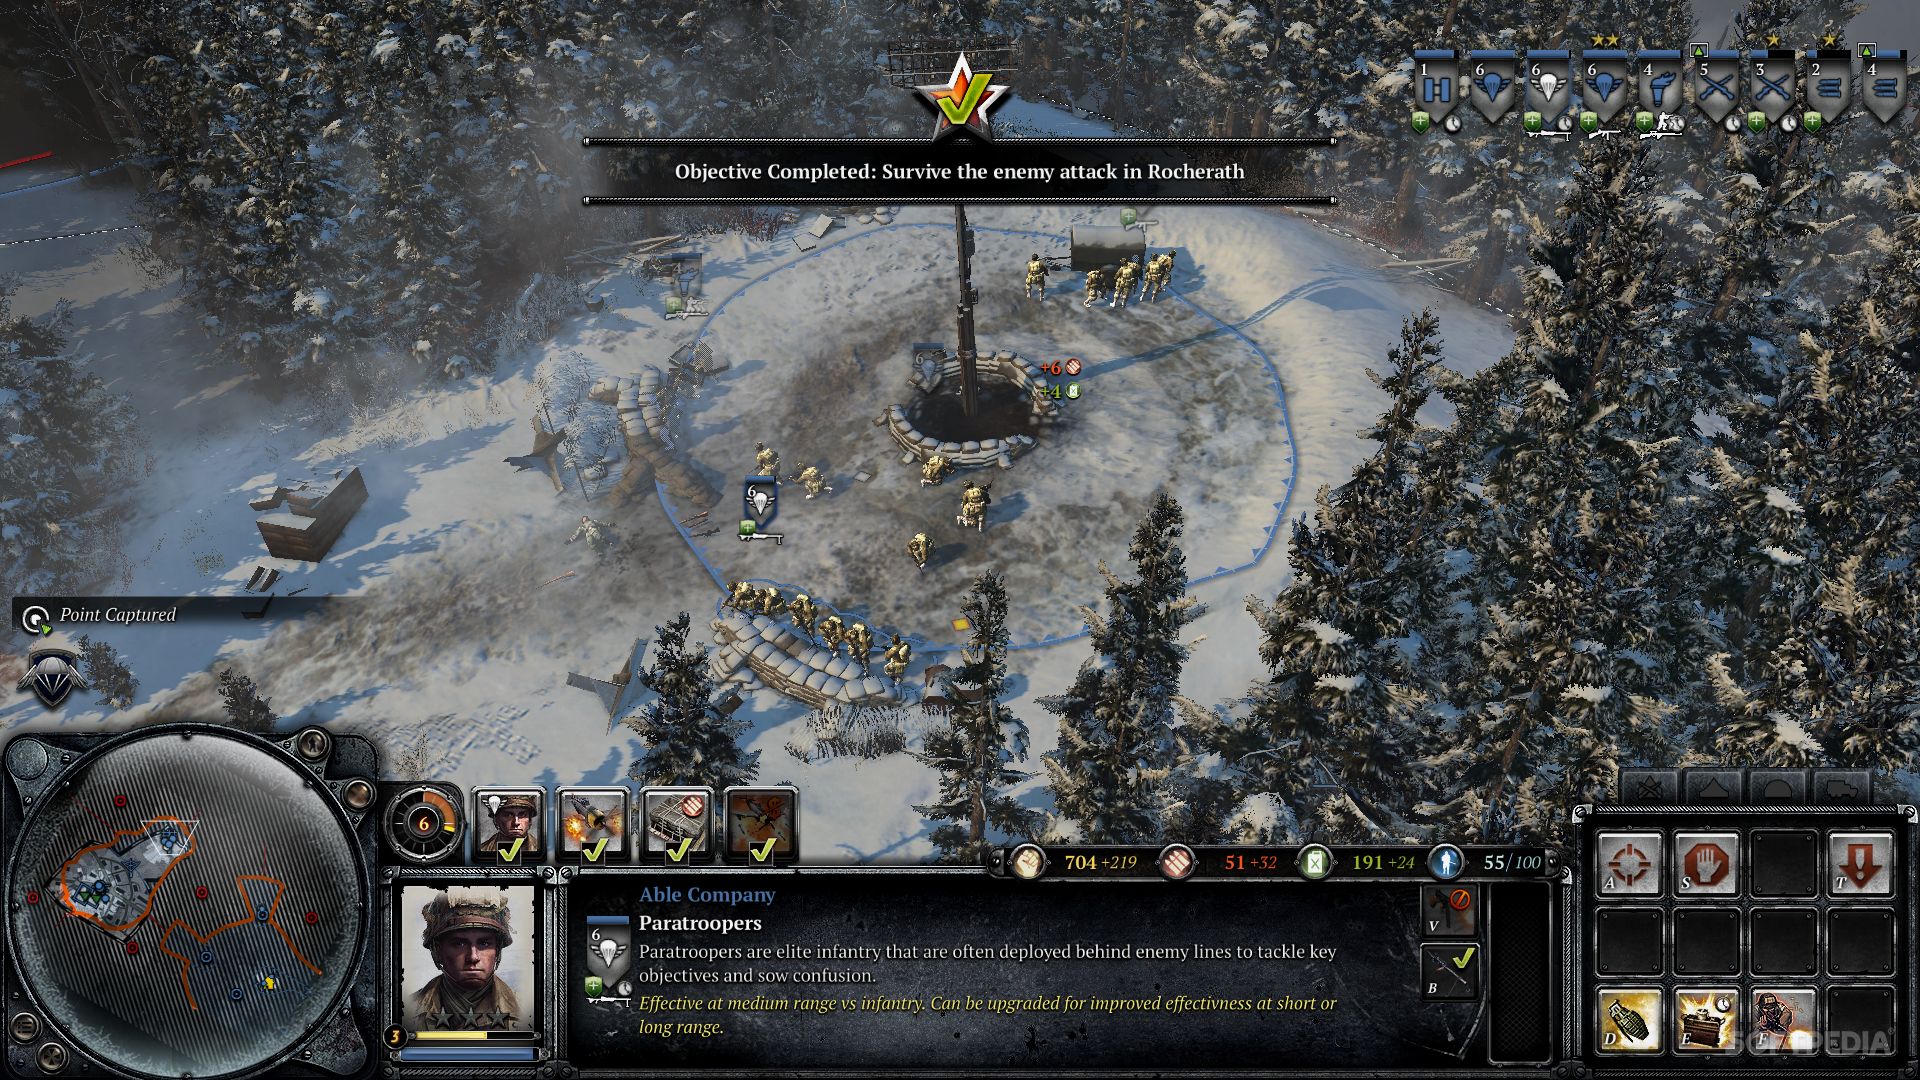 company of heroes 2 german campaign